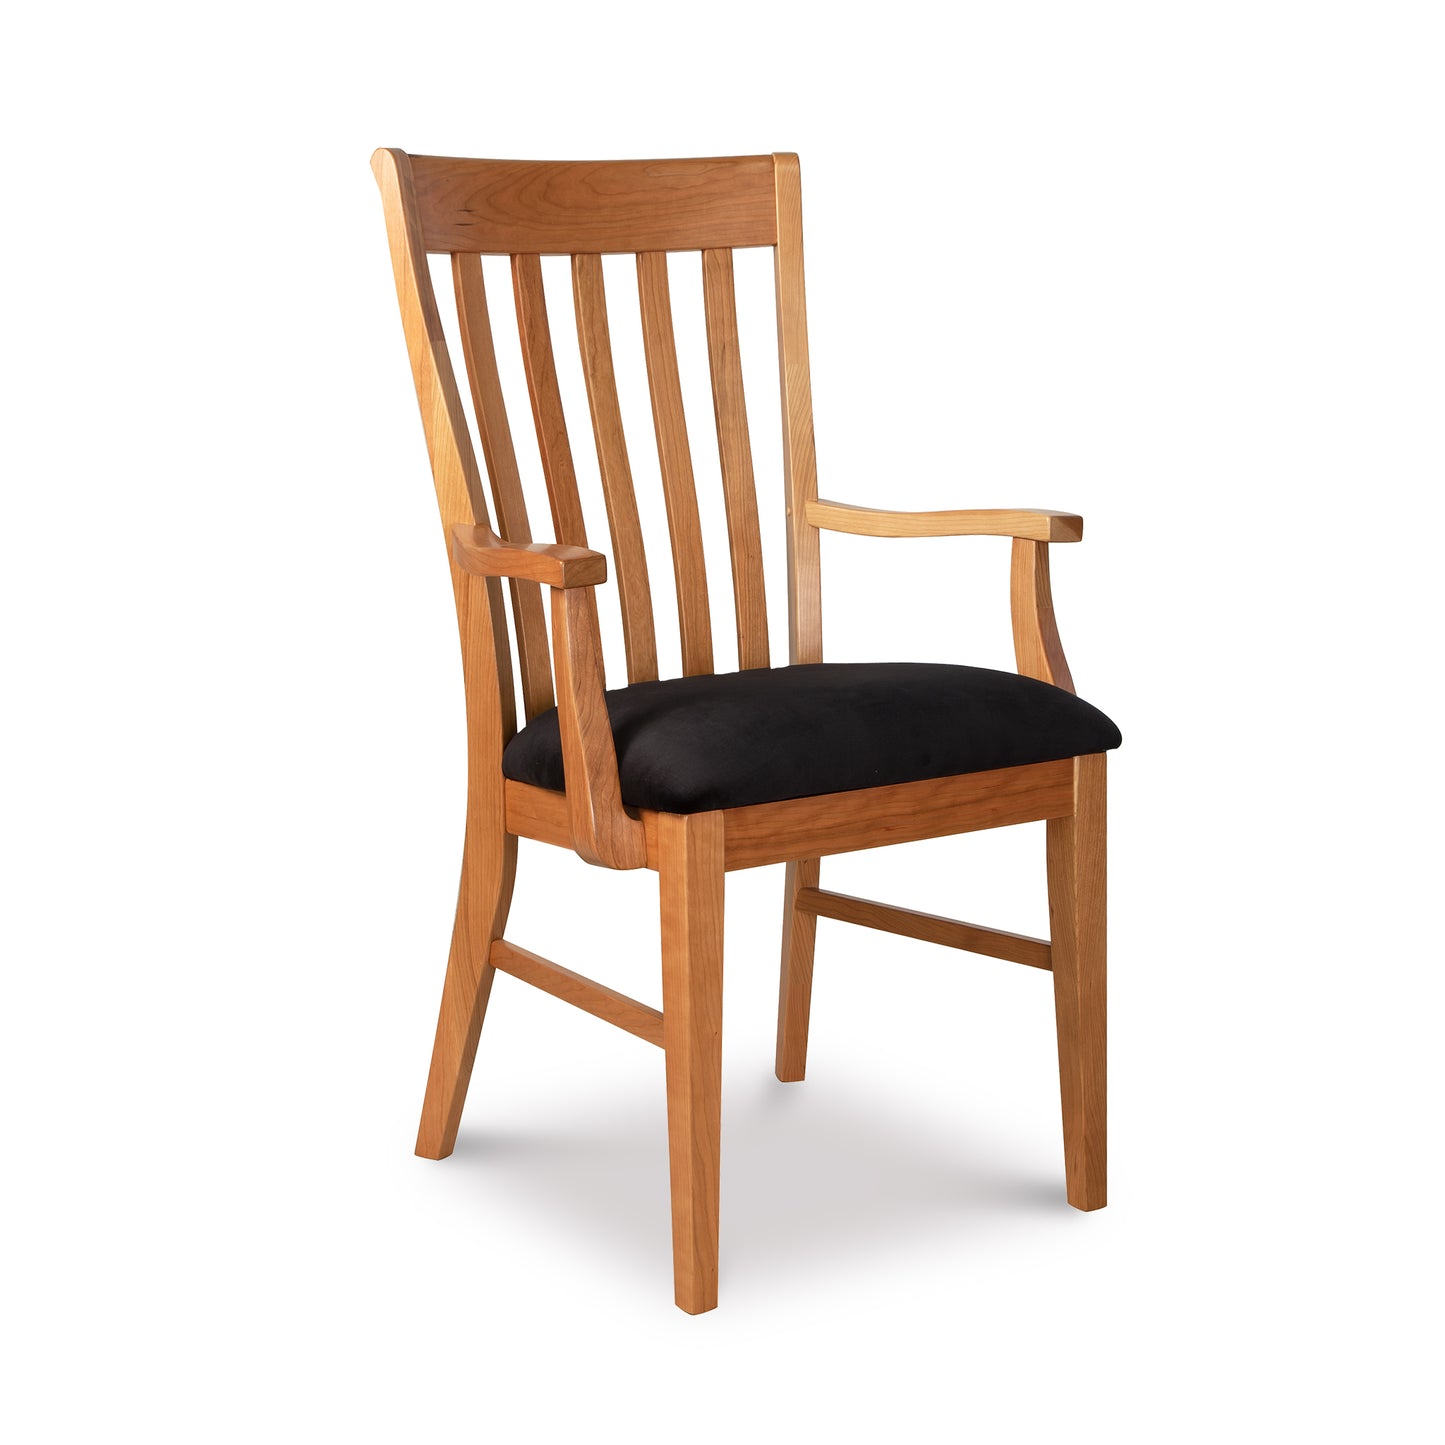 A wooden dining chair with a black cushion.